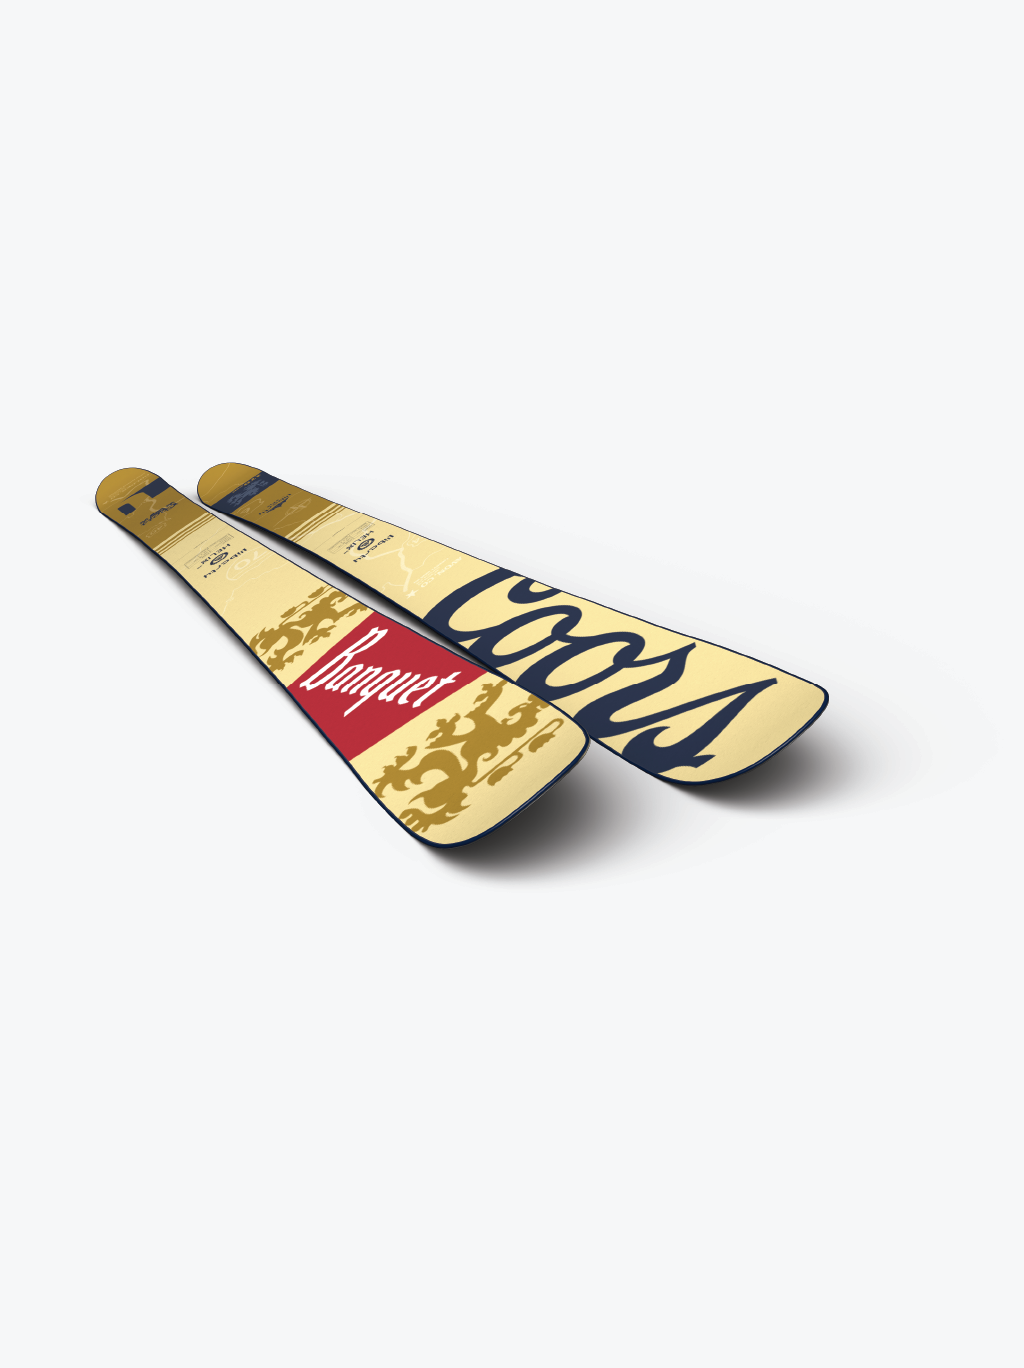 Liberty Skis Coors Skis Liberty Skis x Coors Banquet Helix 98 (Demo)